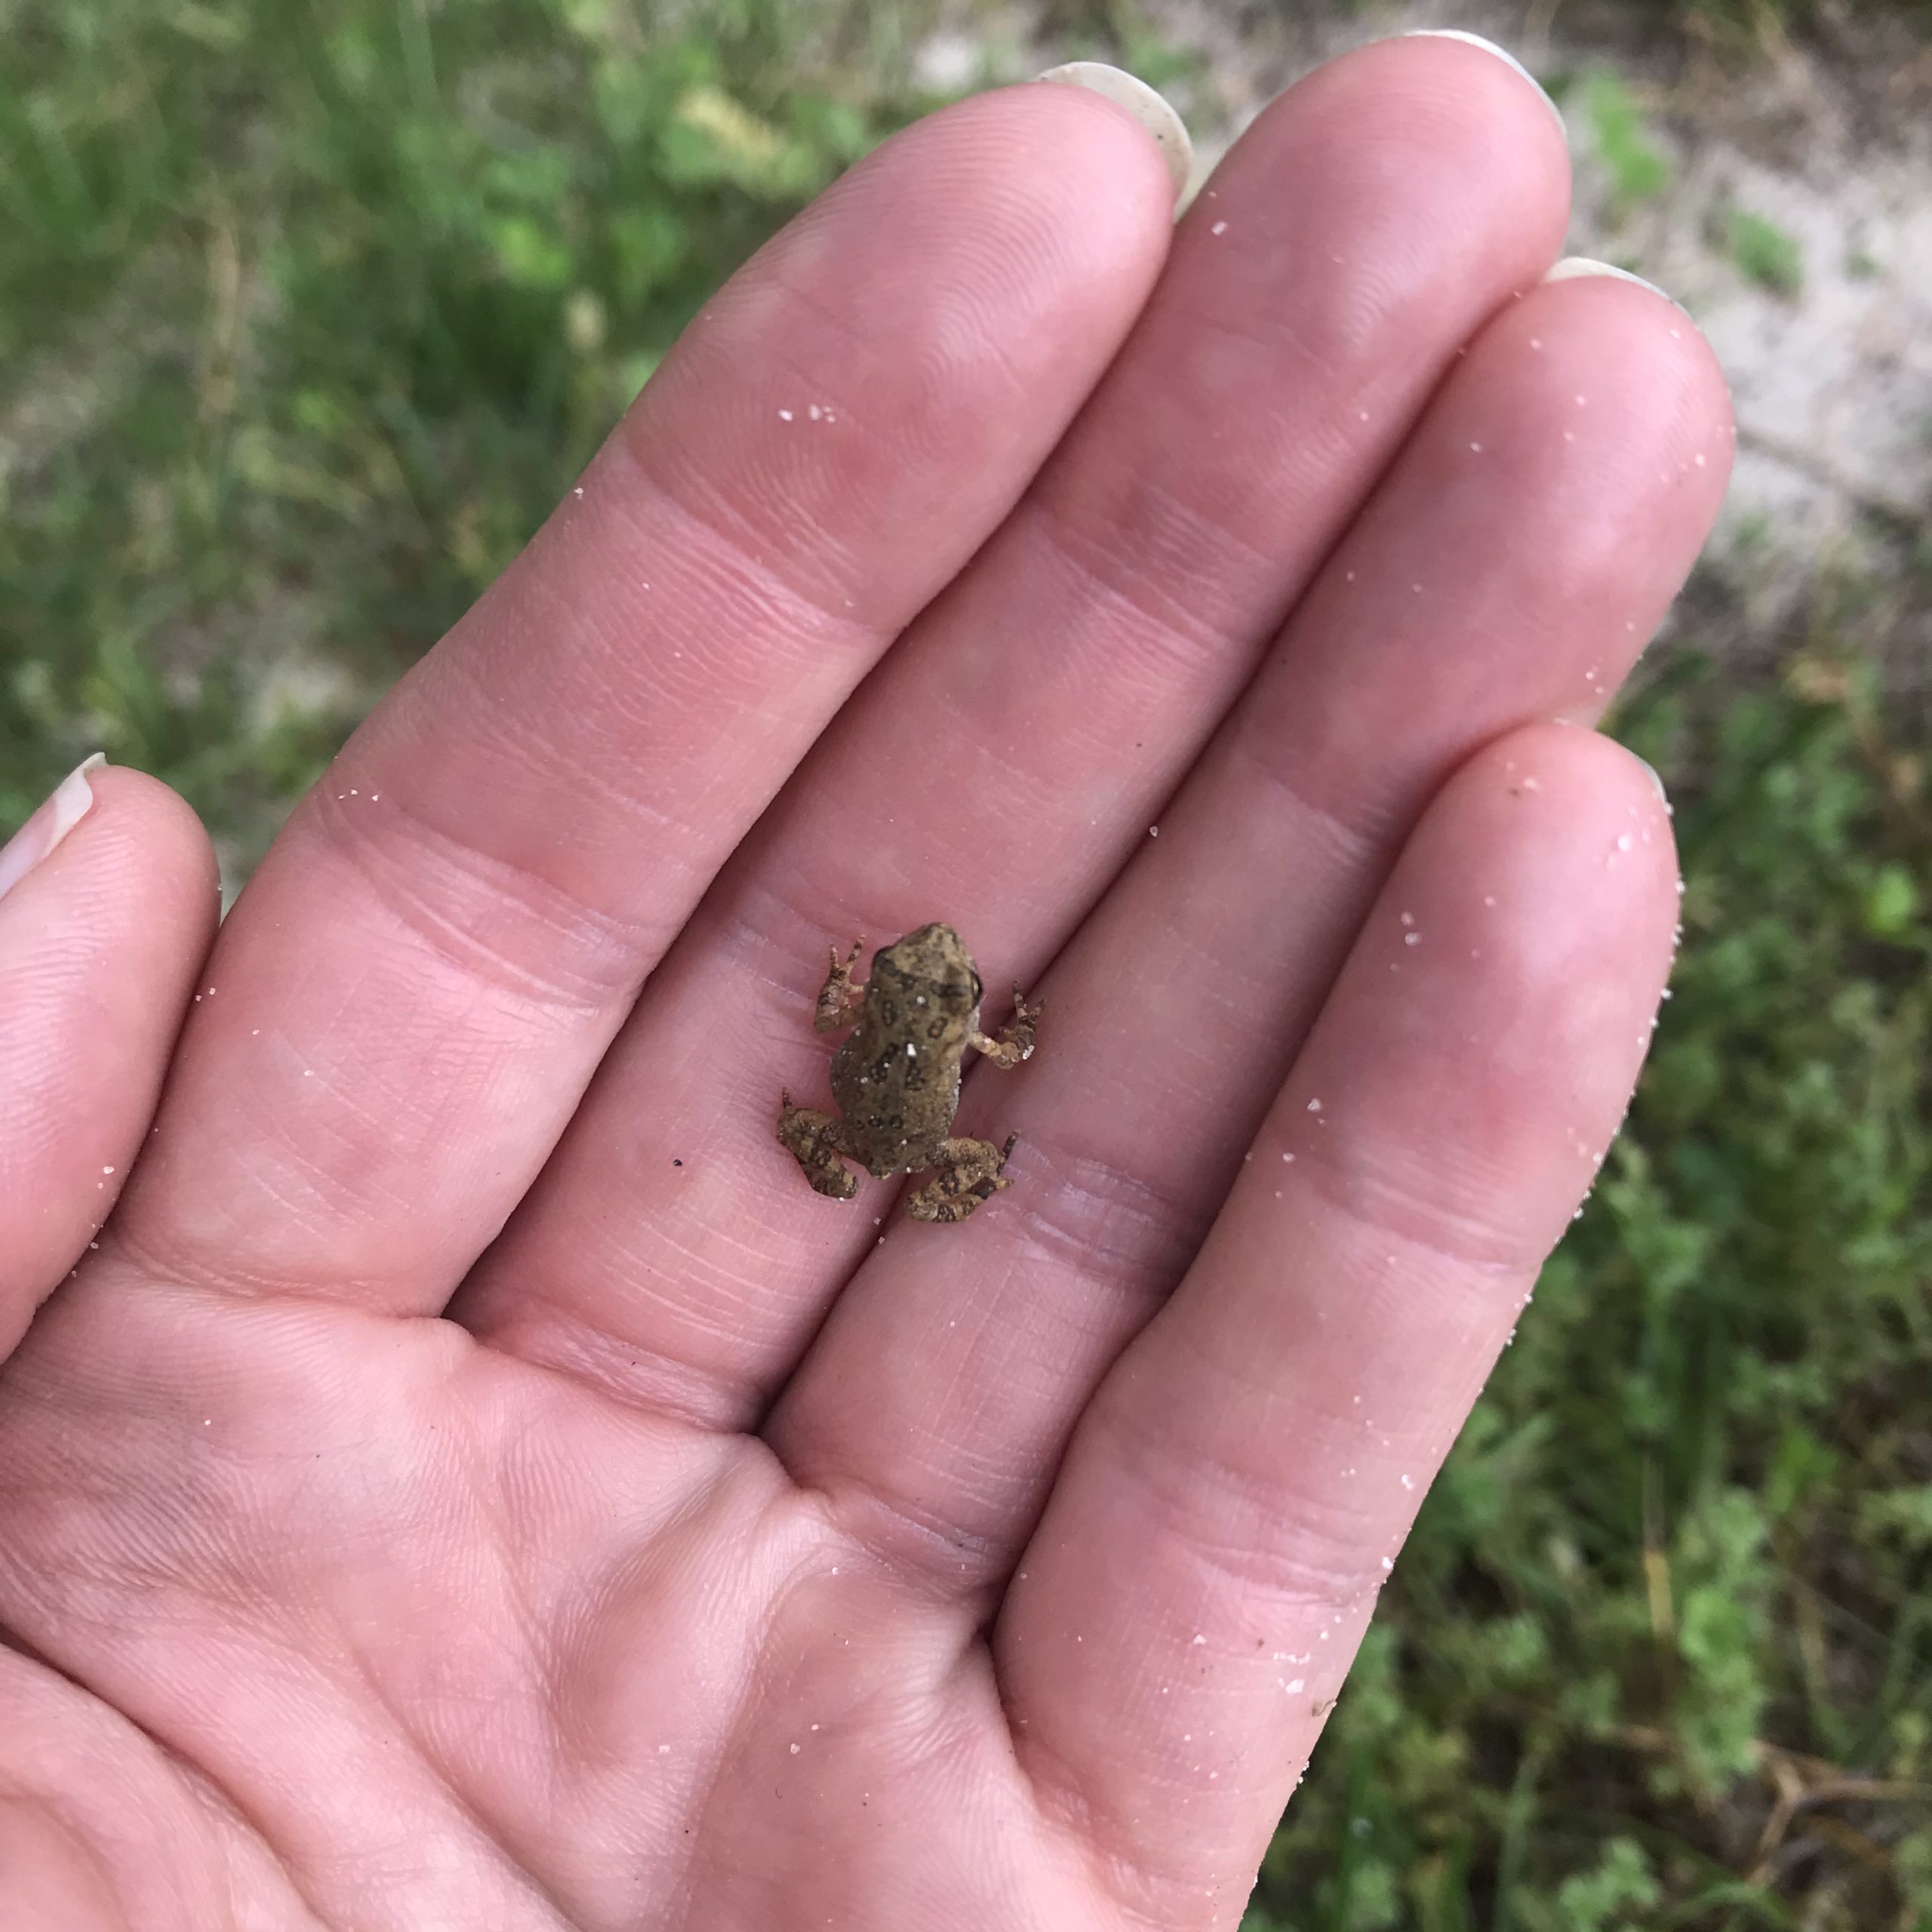 an adorable tiny baby tree frog sitting on a hand